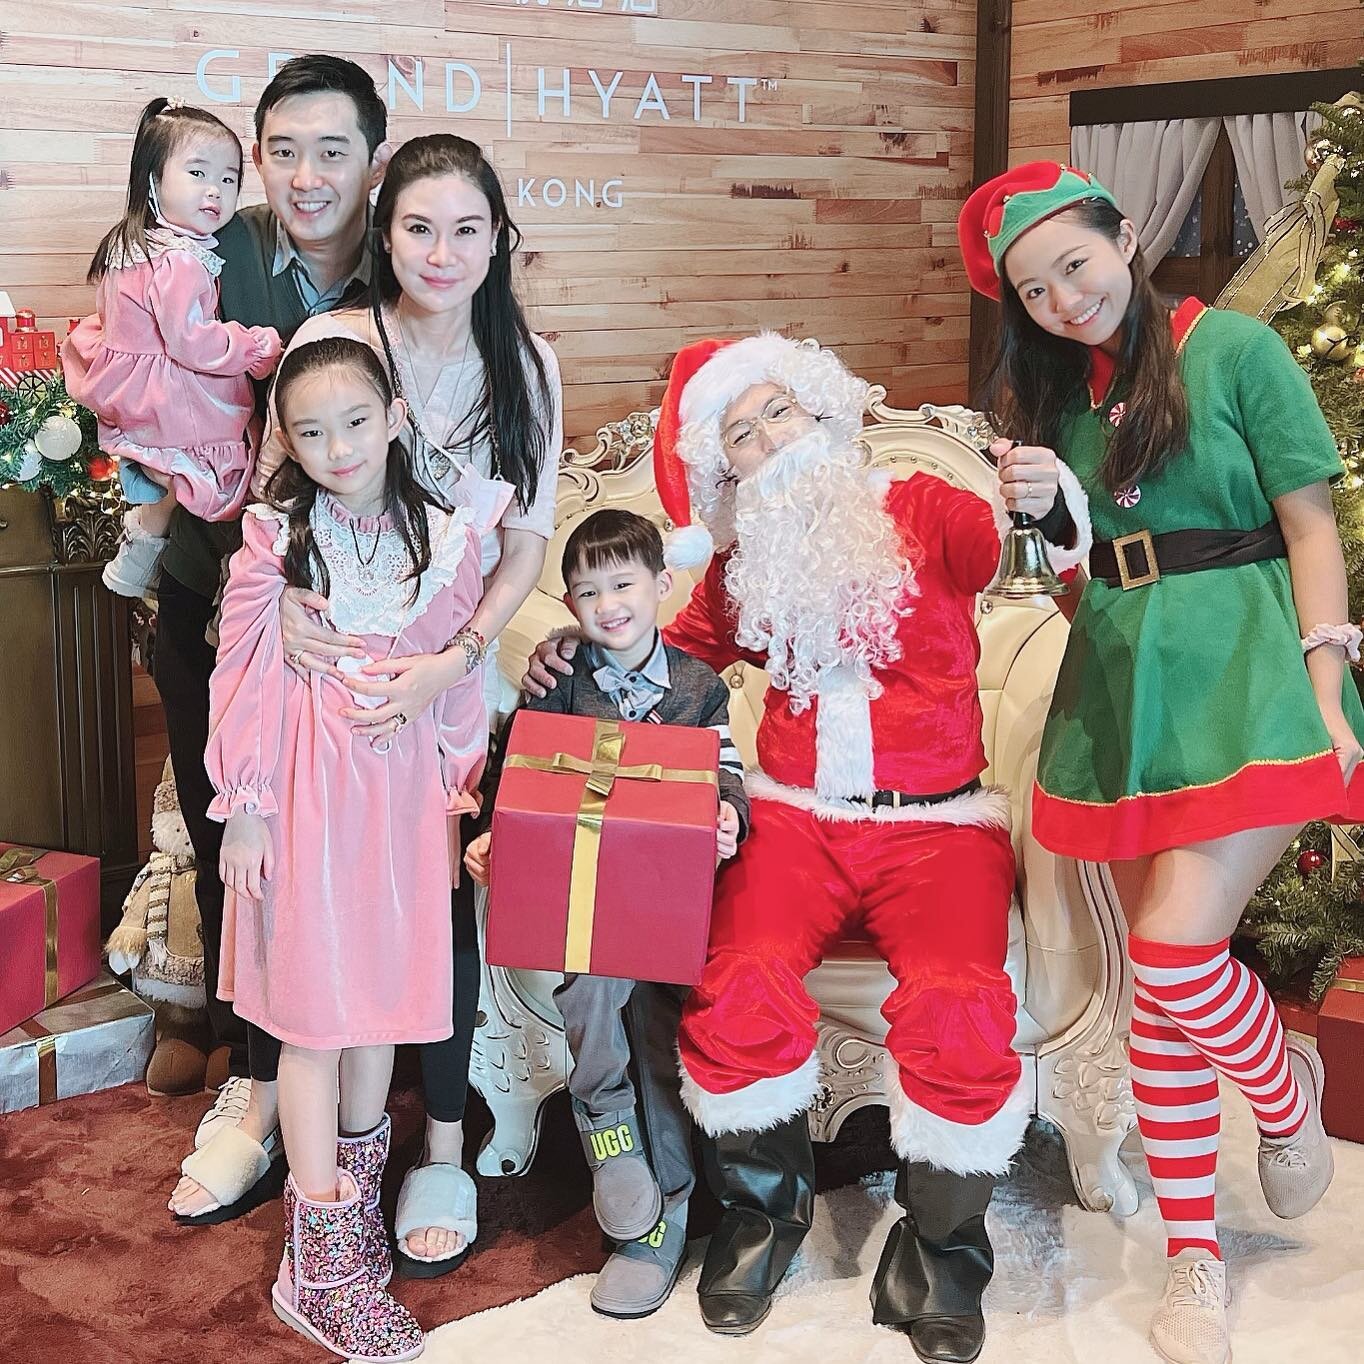 Our Family including @jenniferchenglo @larachenglo @maximuschenglo @arabellachenglo was very excited to meet one of the Santas comprising Christmas Spirit today @grandhyatthongkong  as well as support @makeawishhk #makeawish #makeawishfoundation #Che